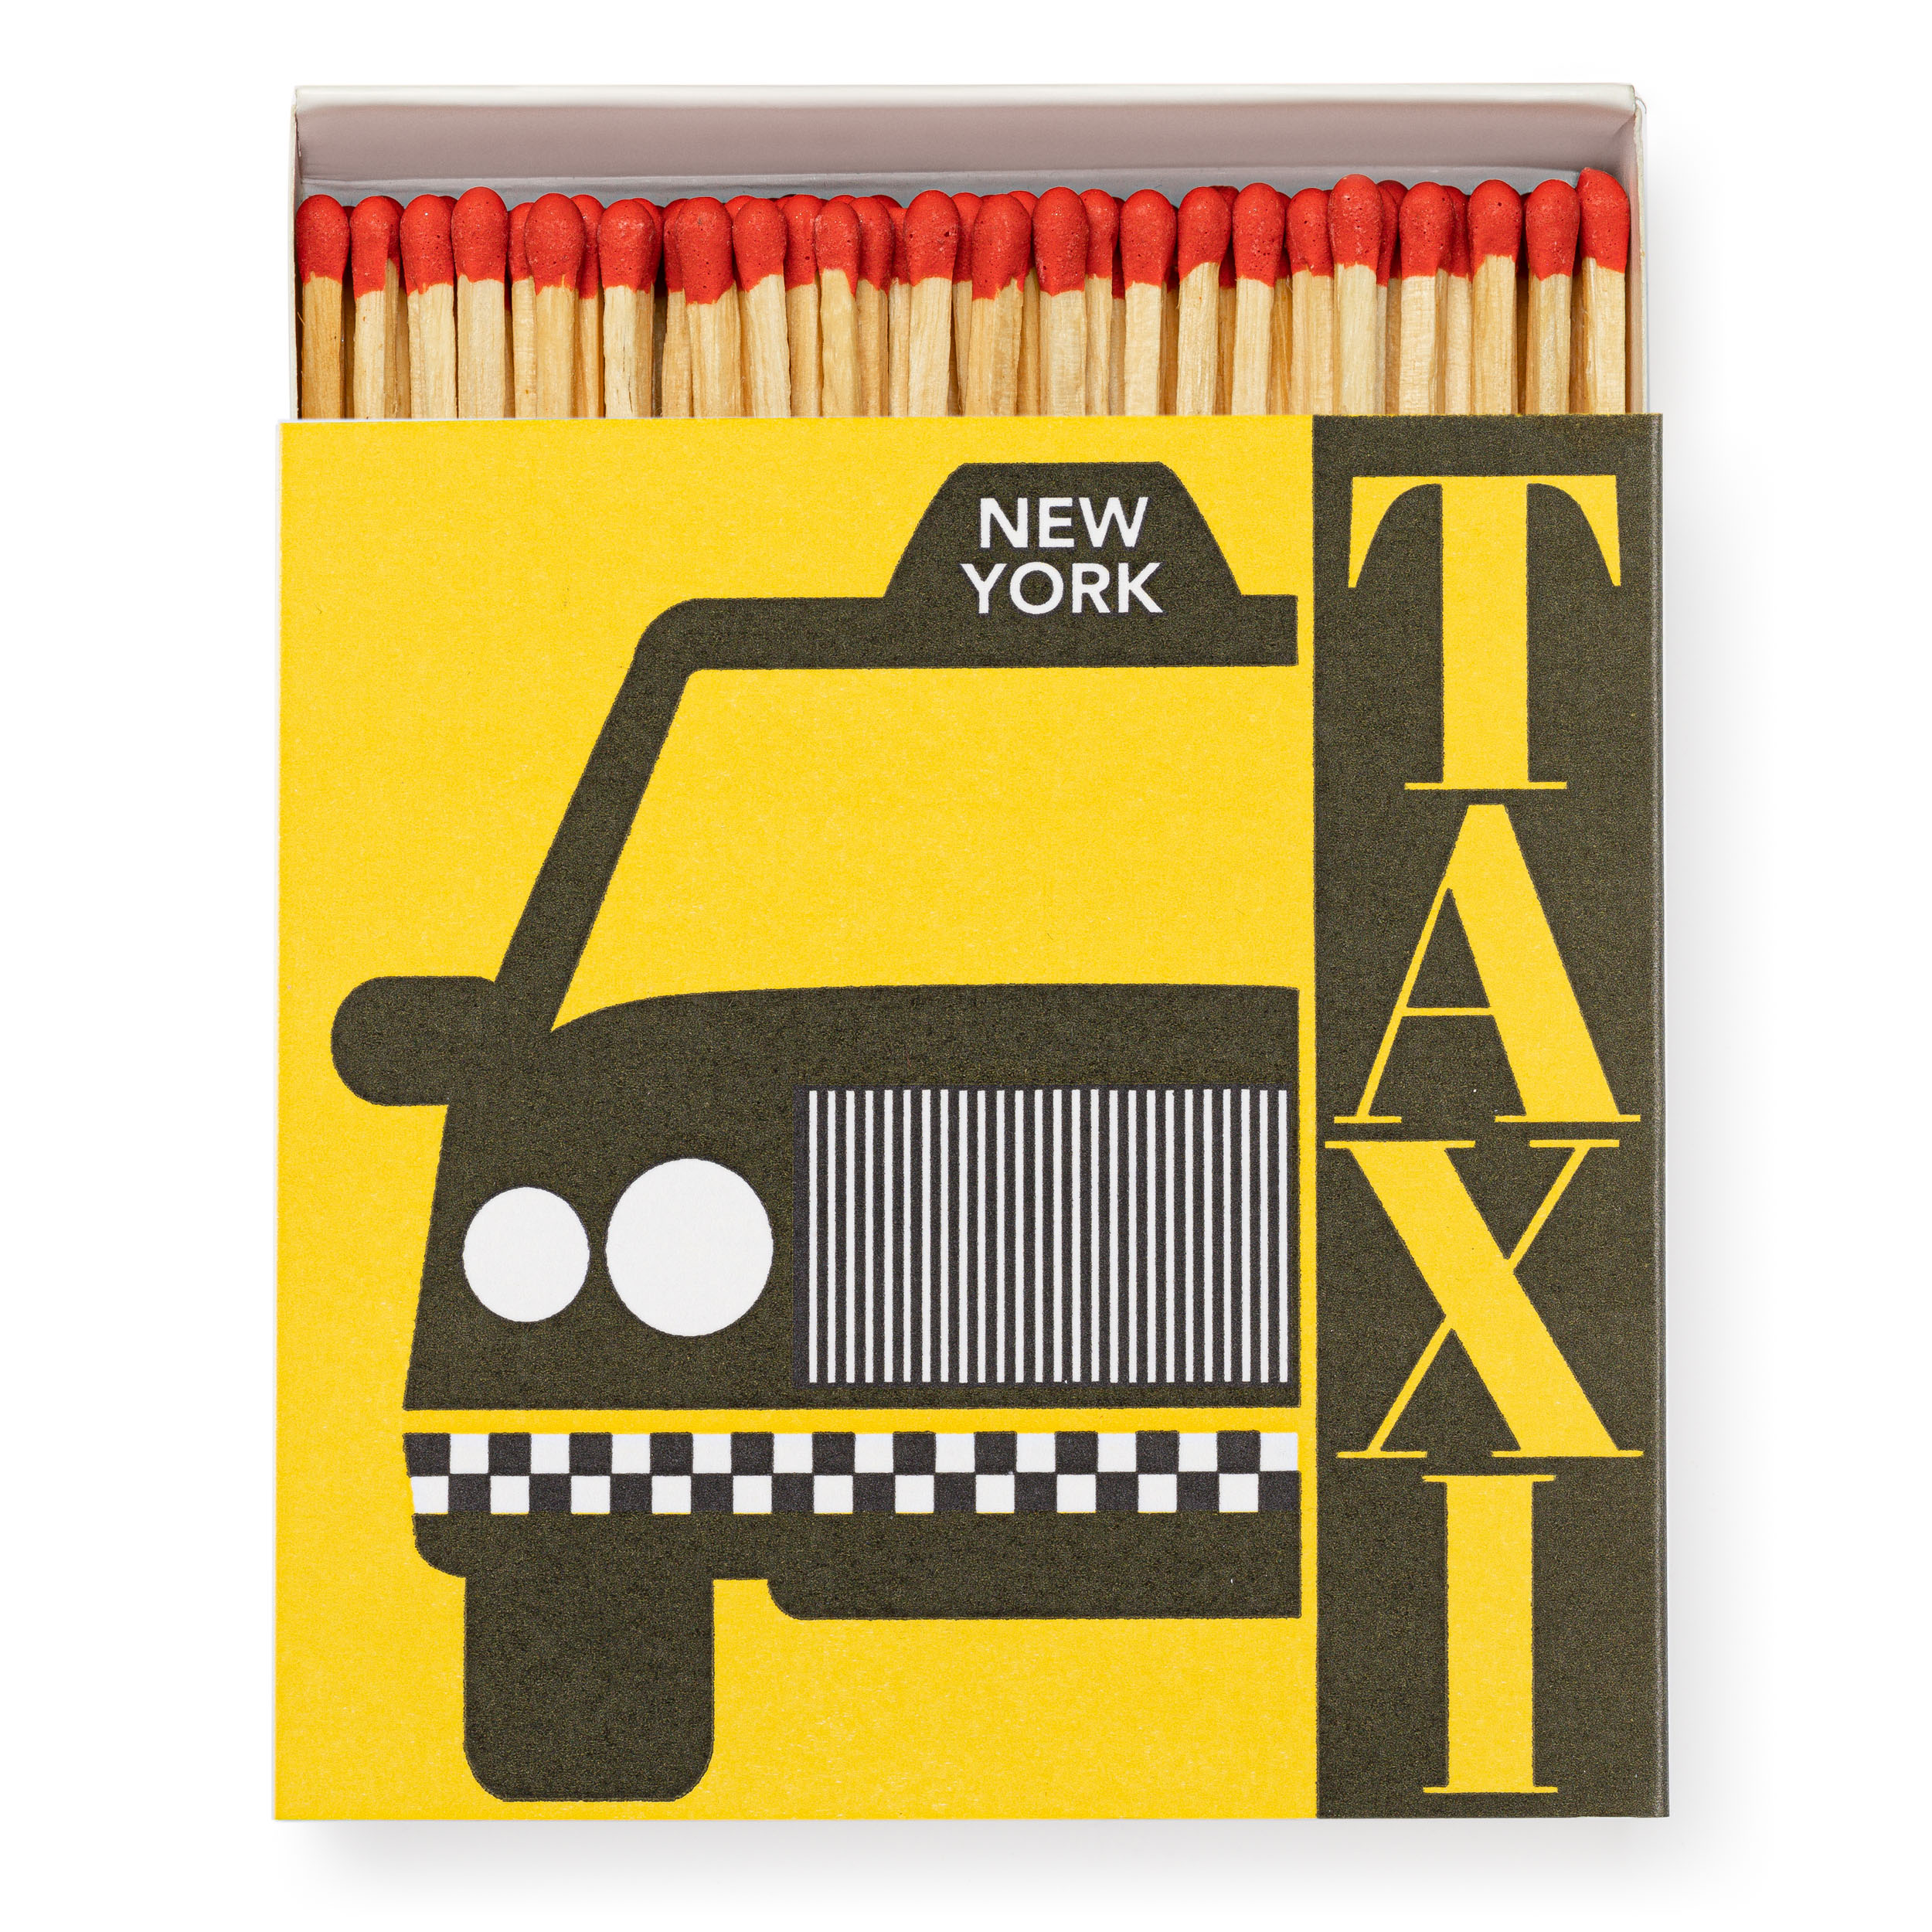 NYC Taxi - Square Matchboxes - Archivist - from Archivist Gallery 